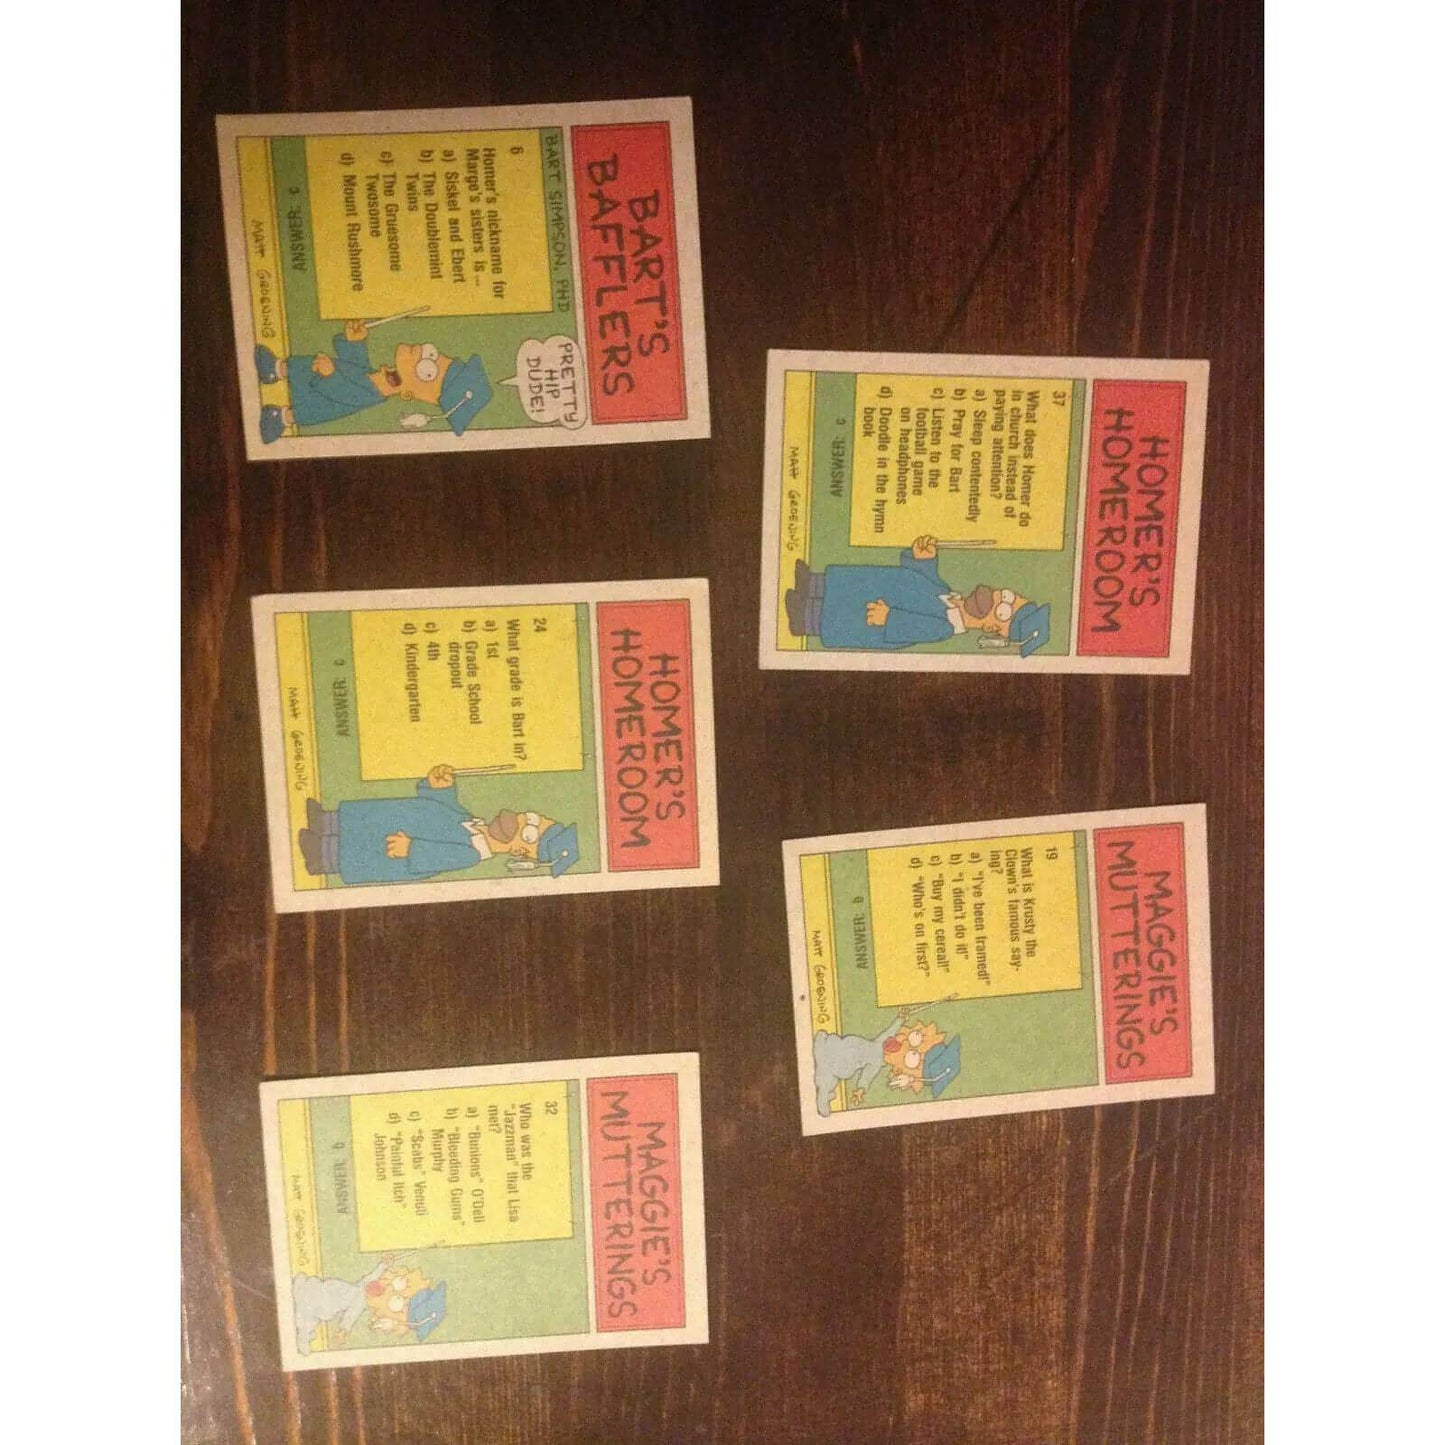 Simpsons Trading Cards [1993] BooksCardsNBikes